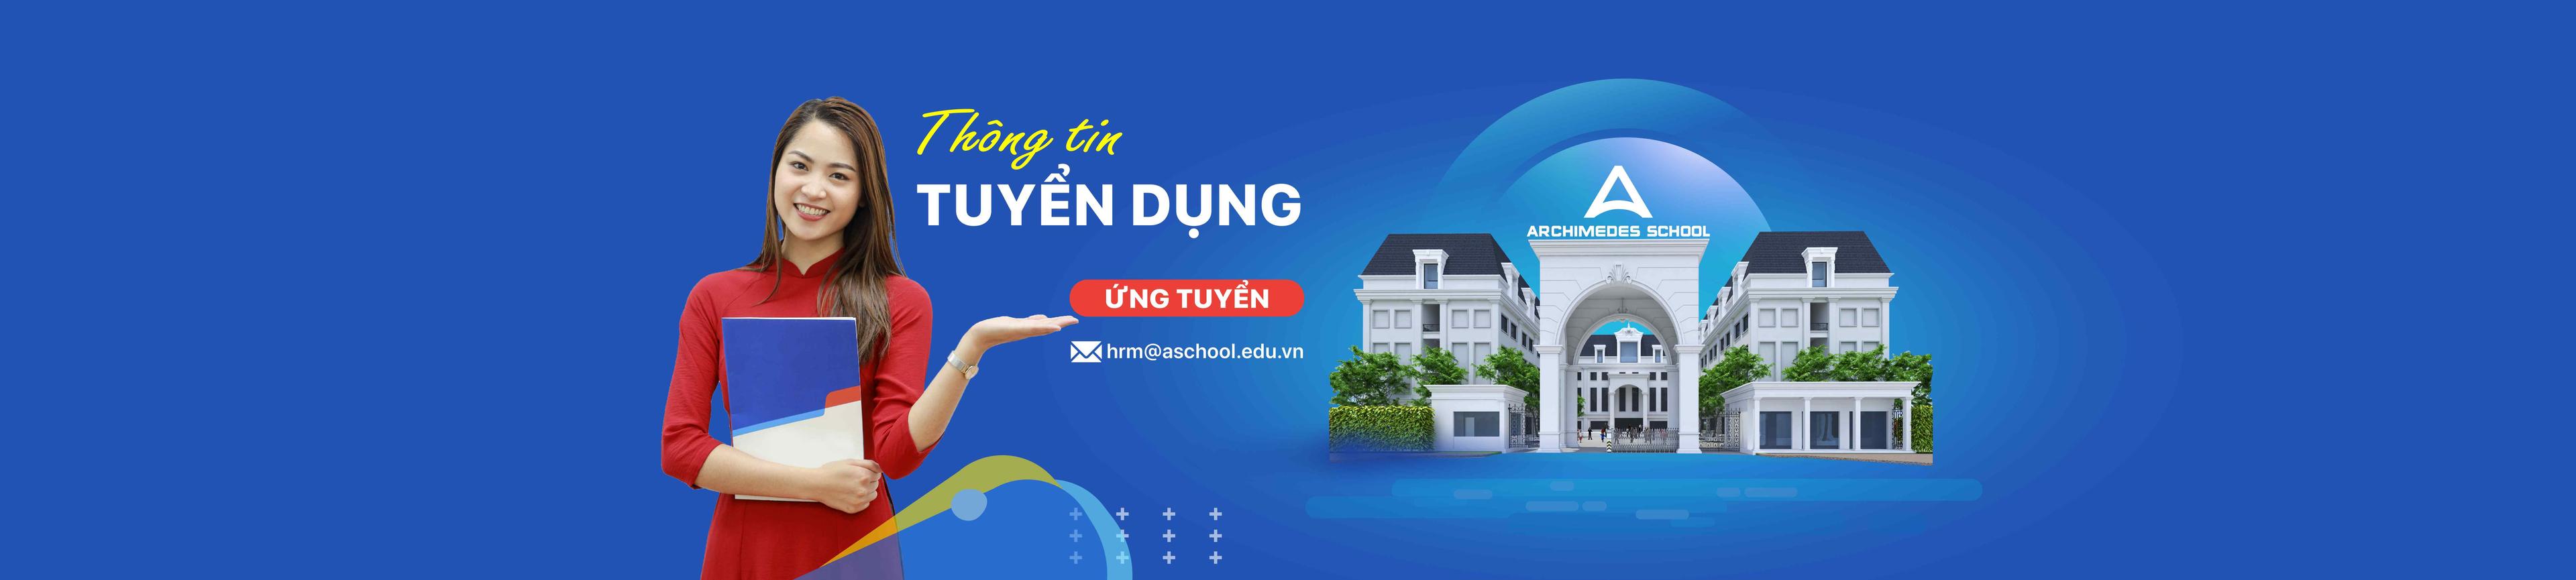 Latest Hệ Thống Giáo Dục Archimedes School employment/hiring with high salary & attractive benefits